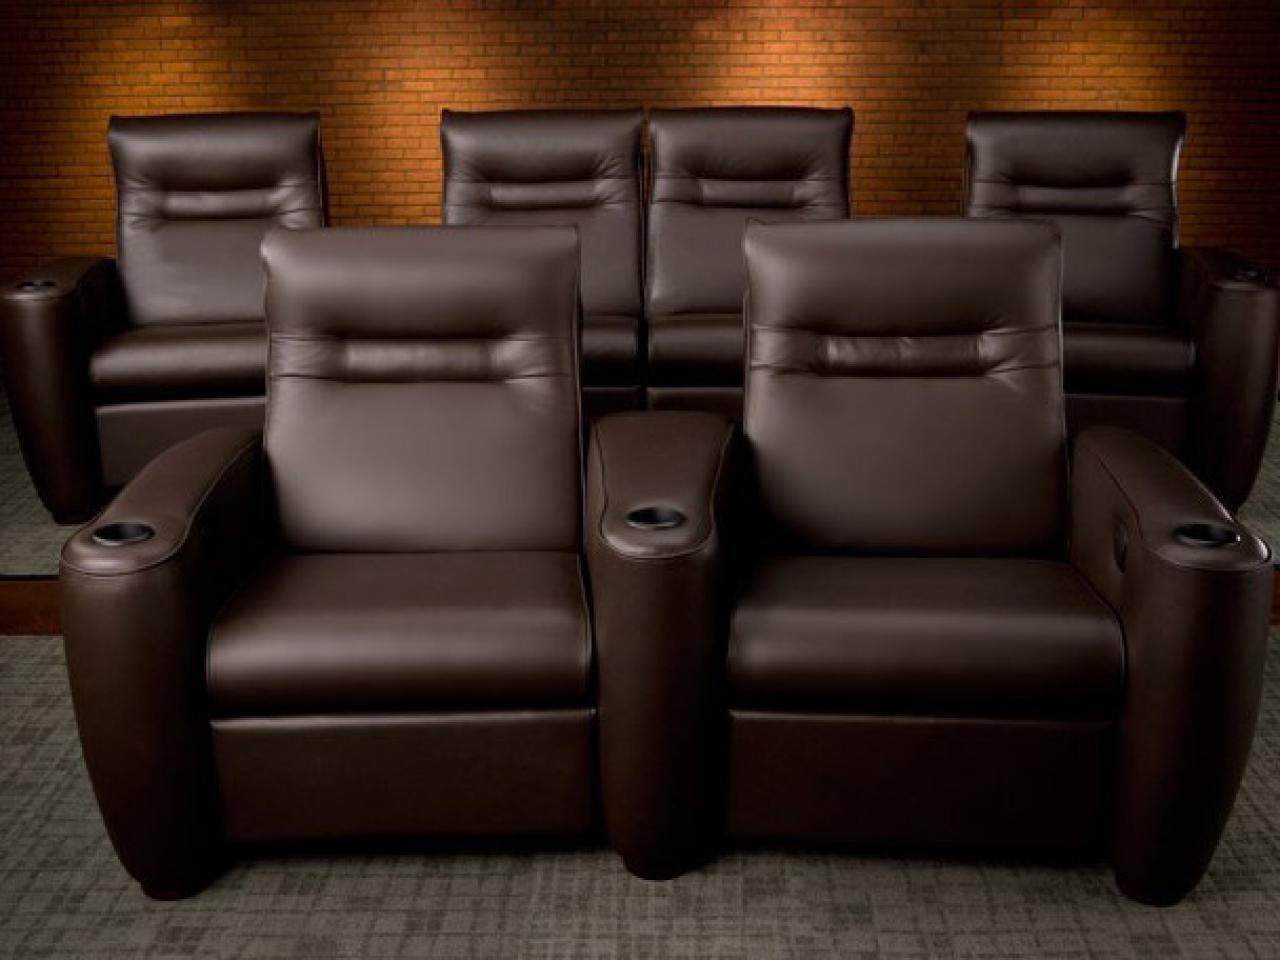 Choosing home theater products home remodeling ideas